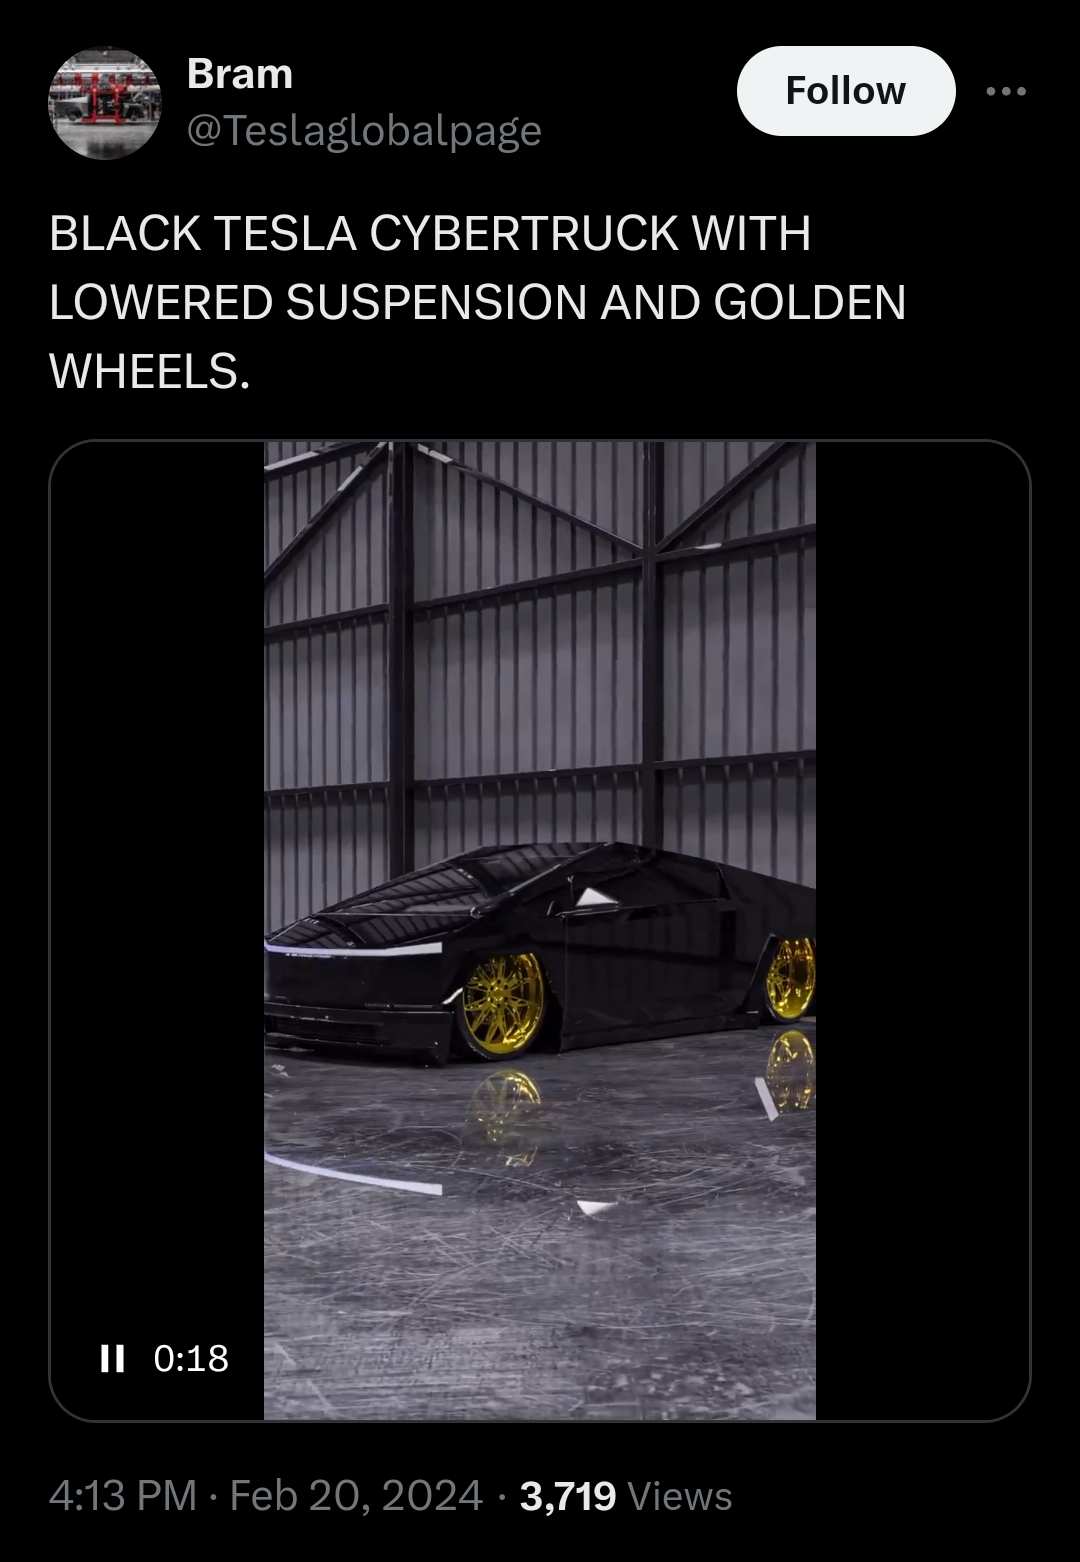 Black Tesla Cybertruck with Golden Wheels Better than any luxury cars